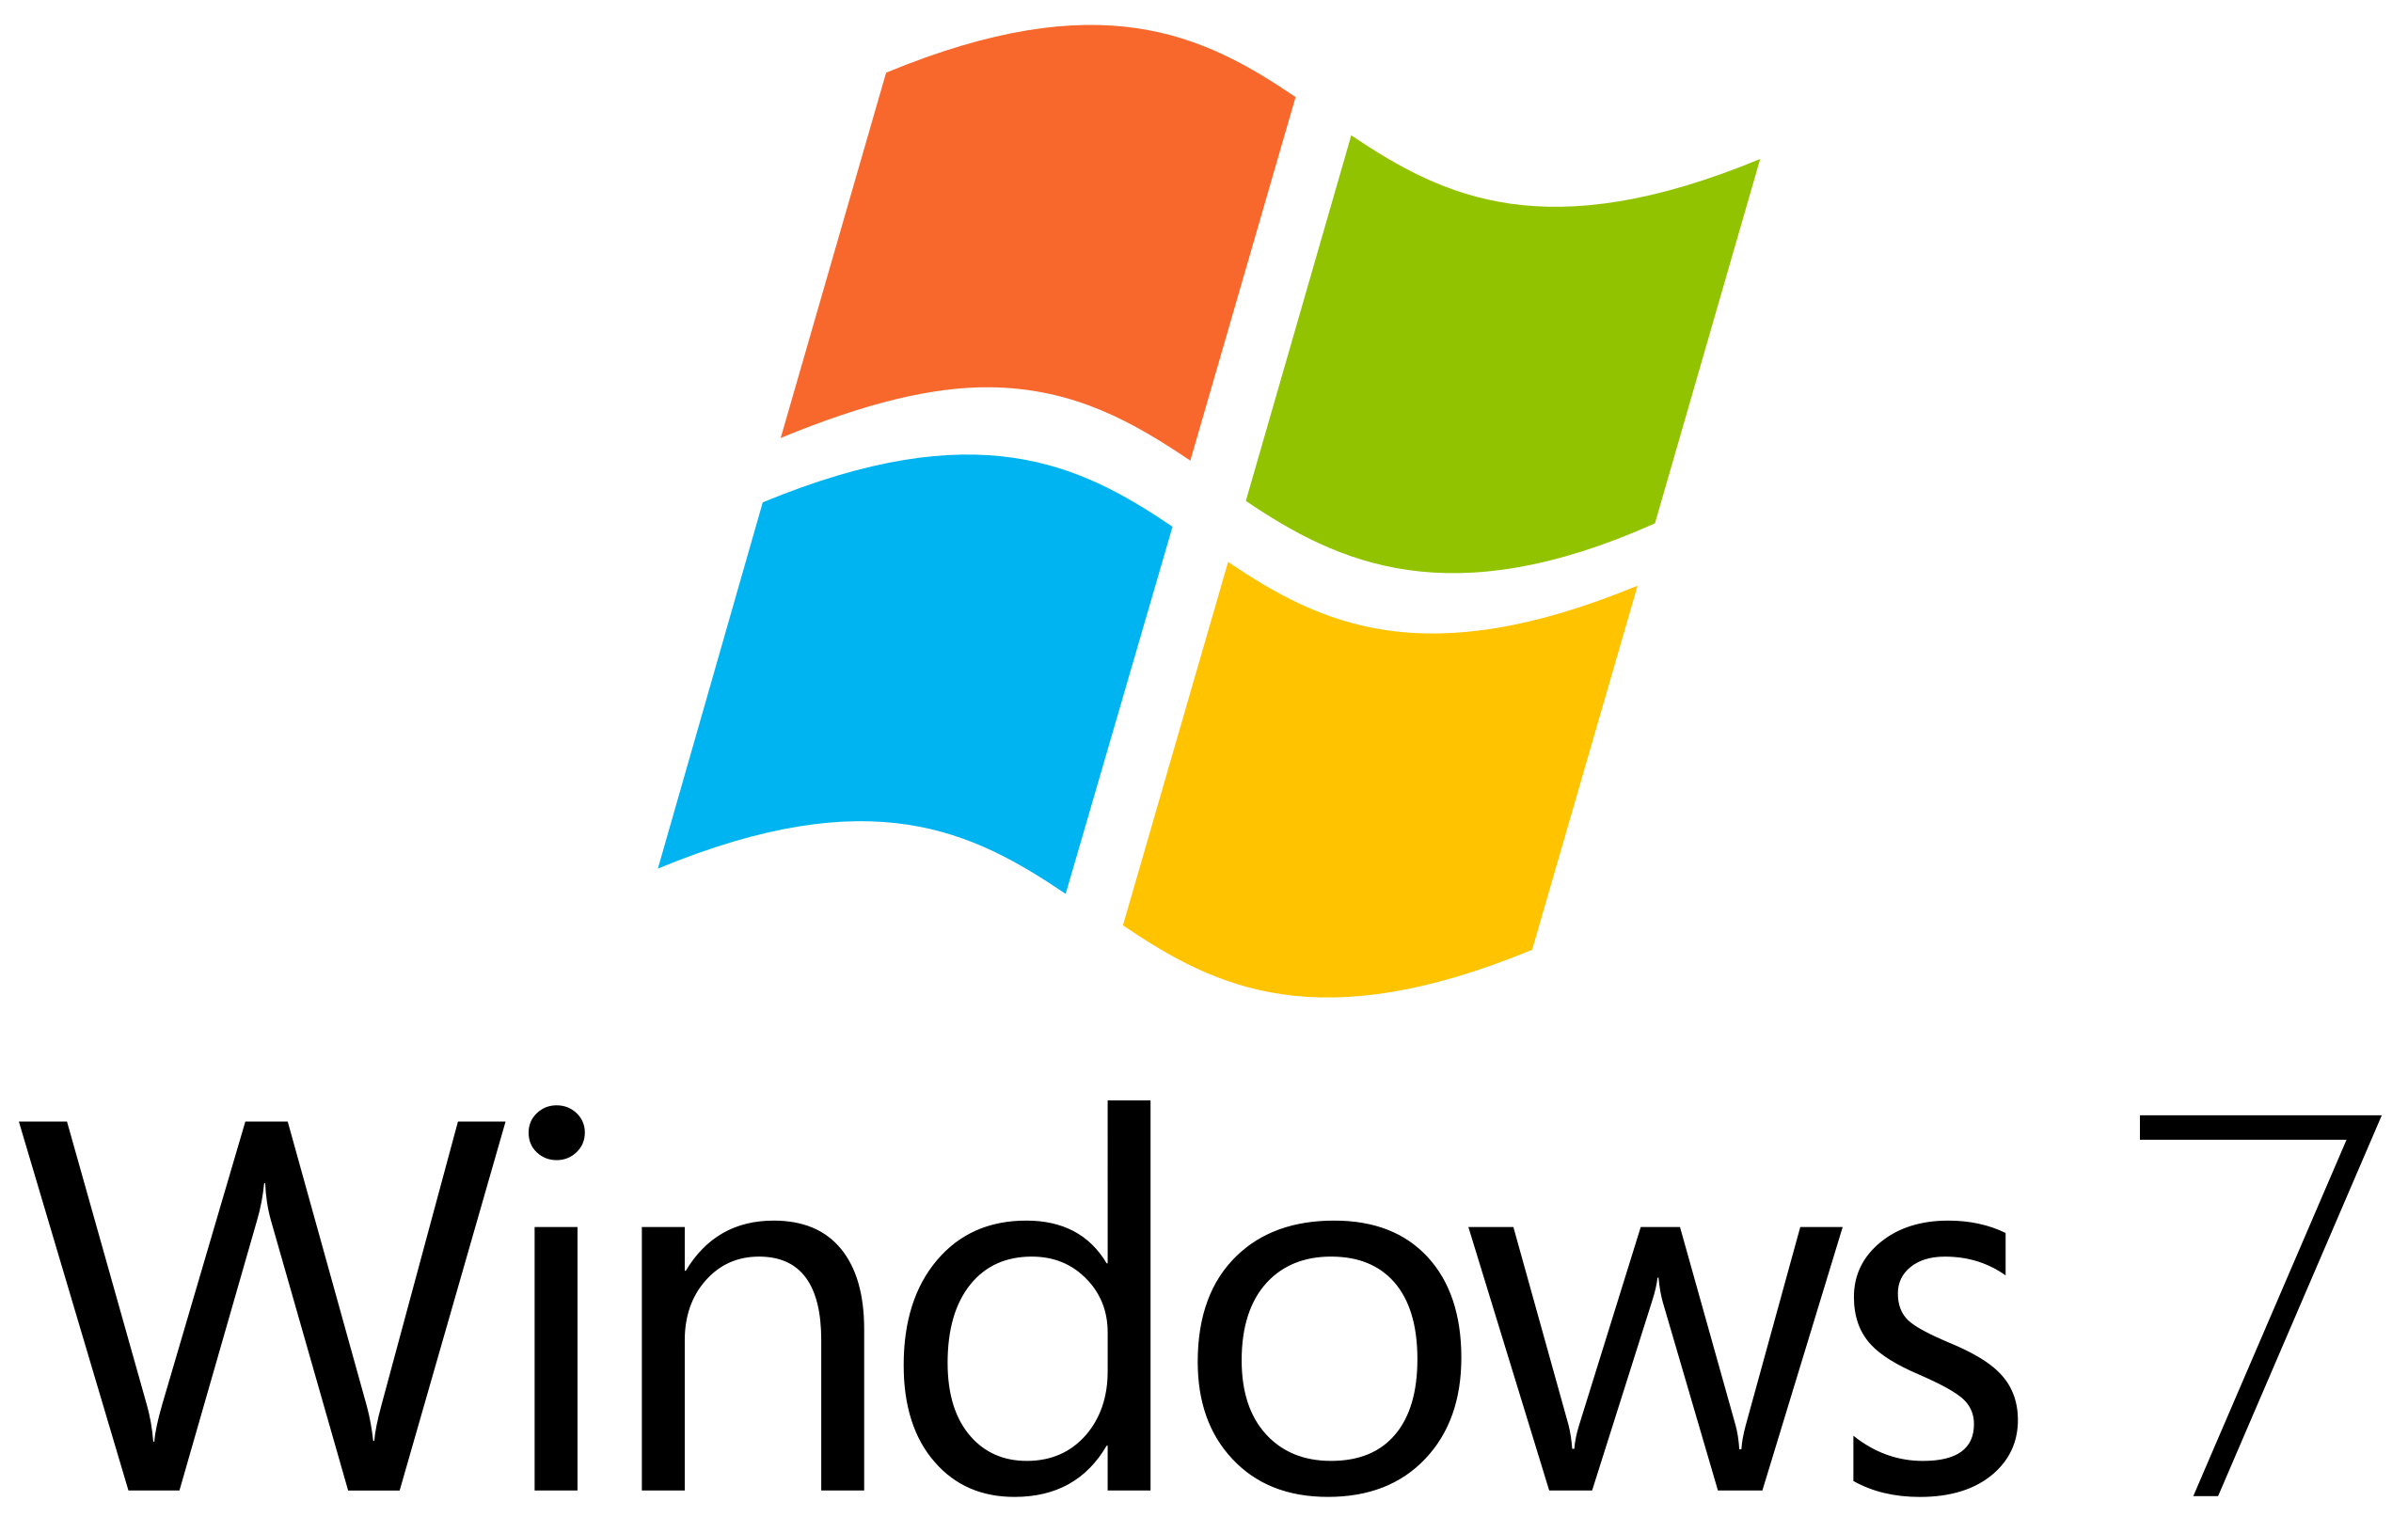 2560px-Unofficial_fan_made_Windows_7_logo_variant.svg.png